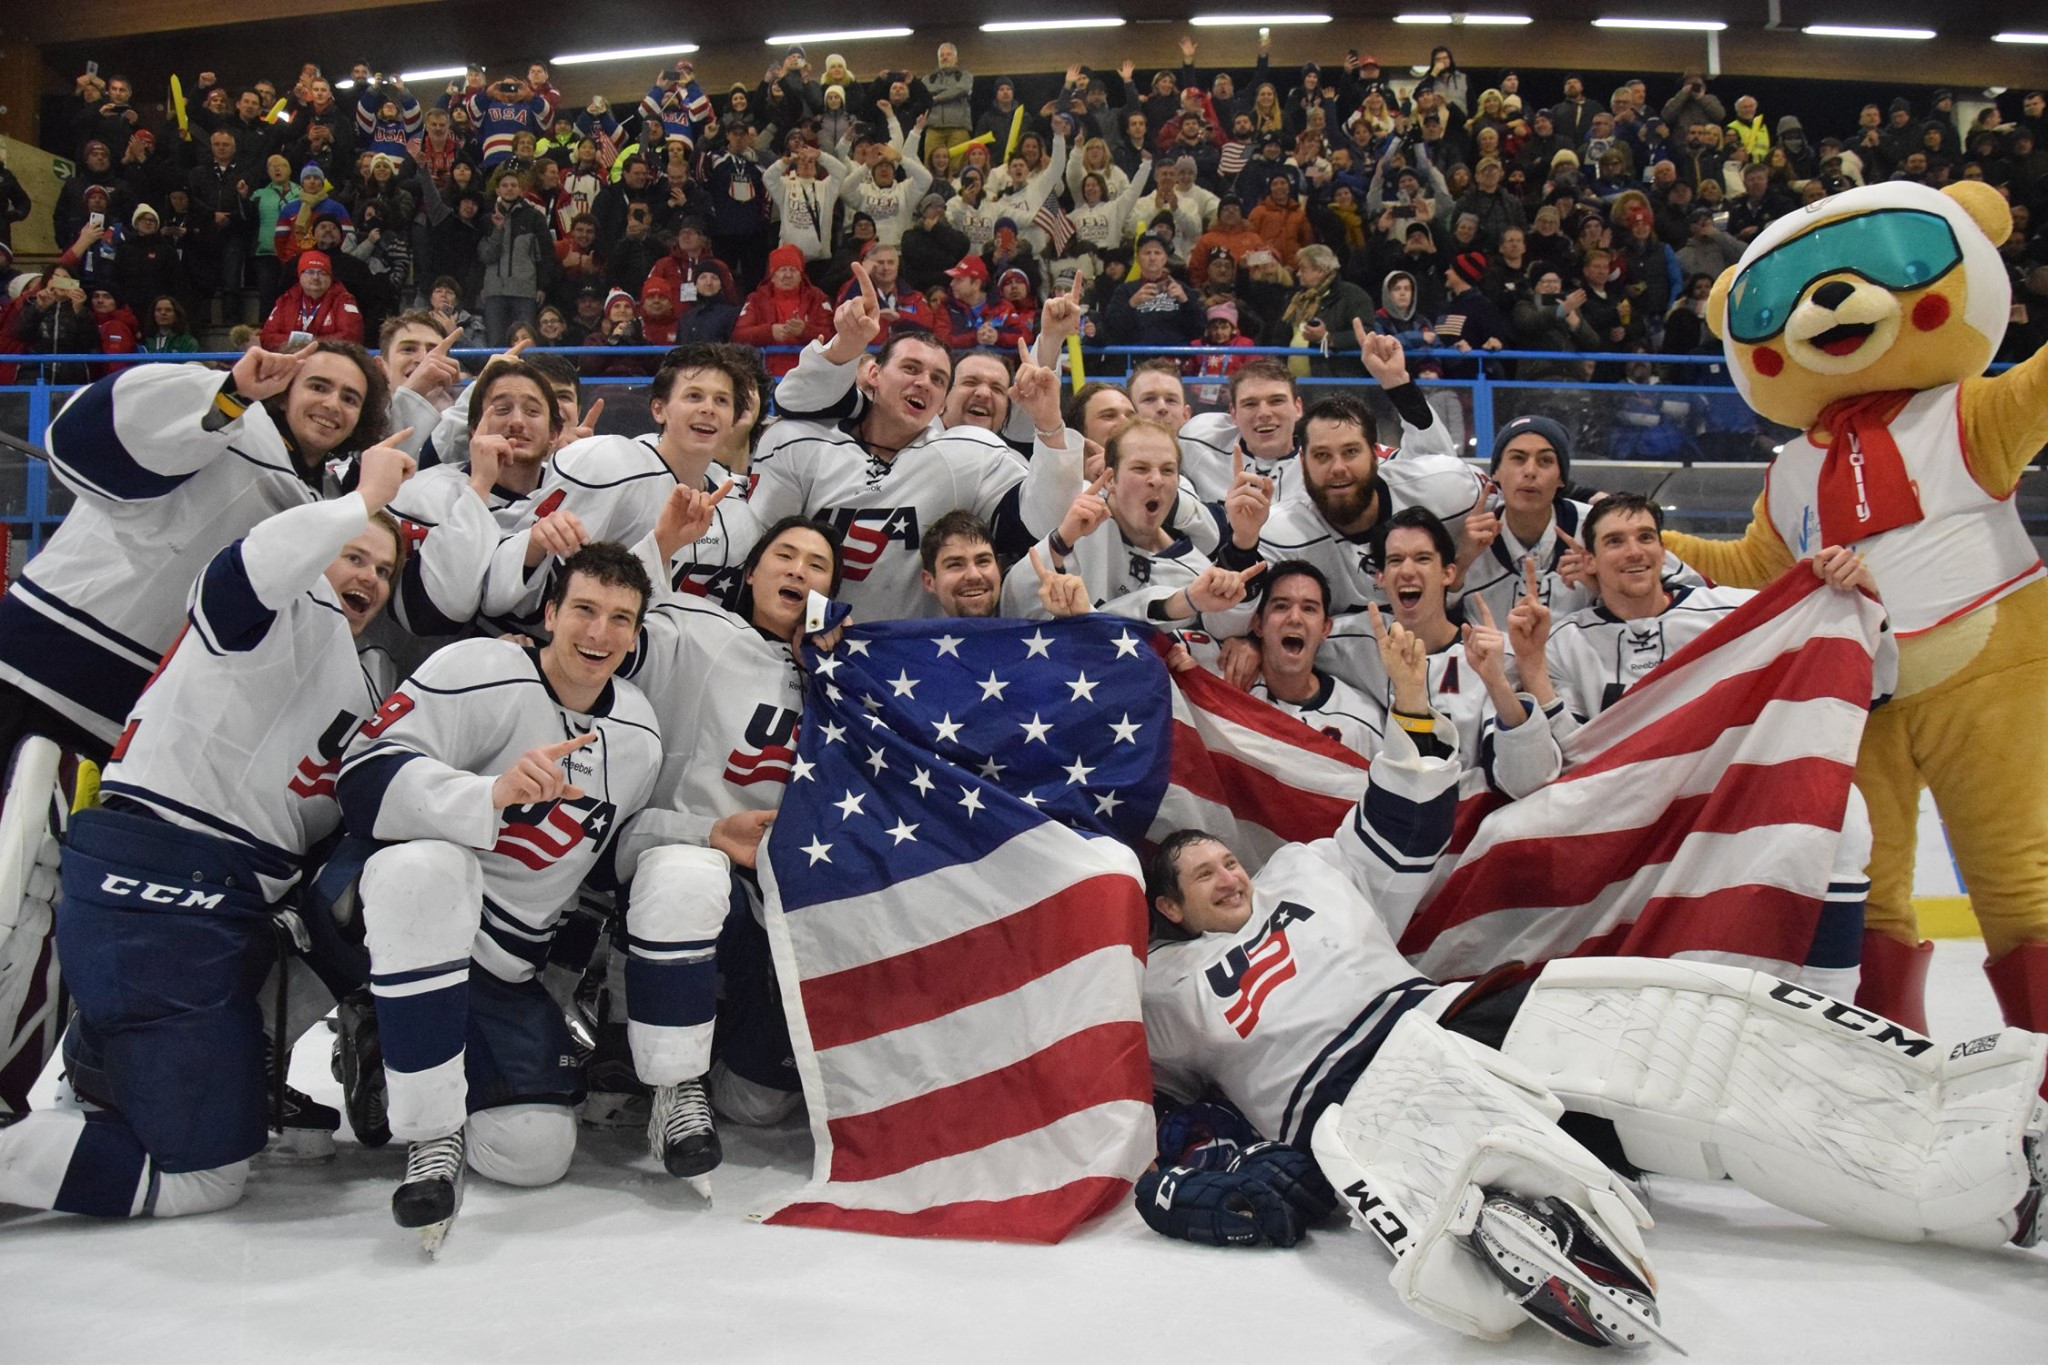 The United States took gold in the ice hockey competition at the Winter Deaflympics in Sondrio ©Winter Deaflympics